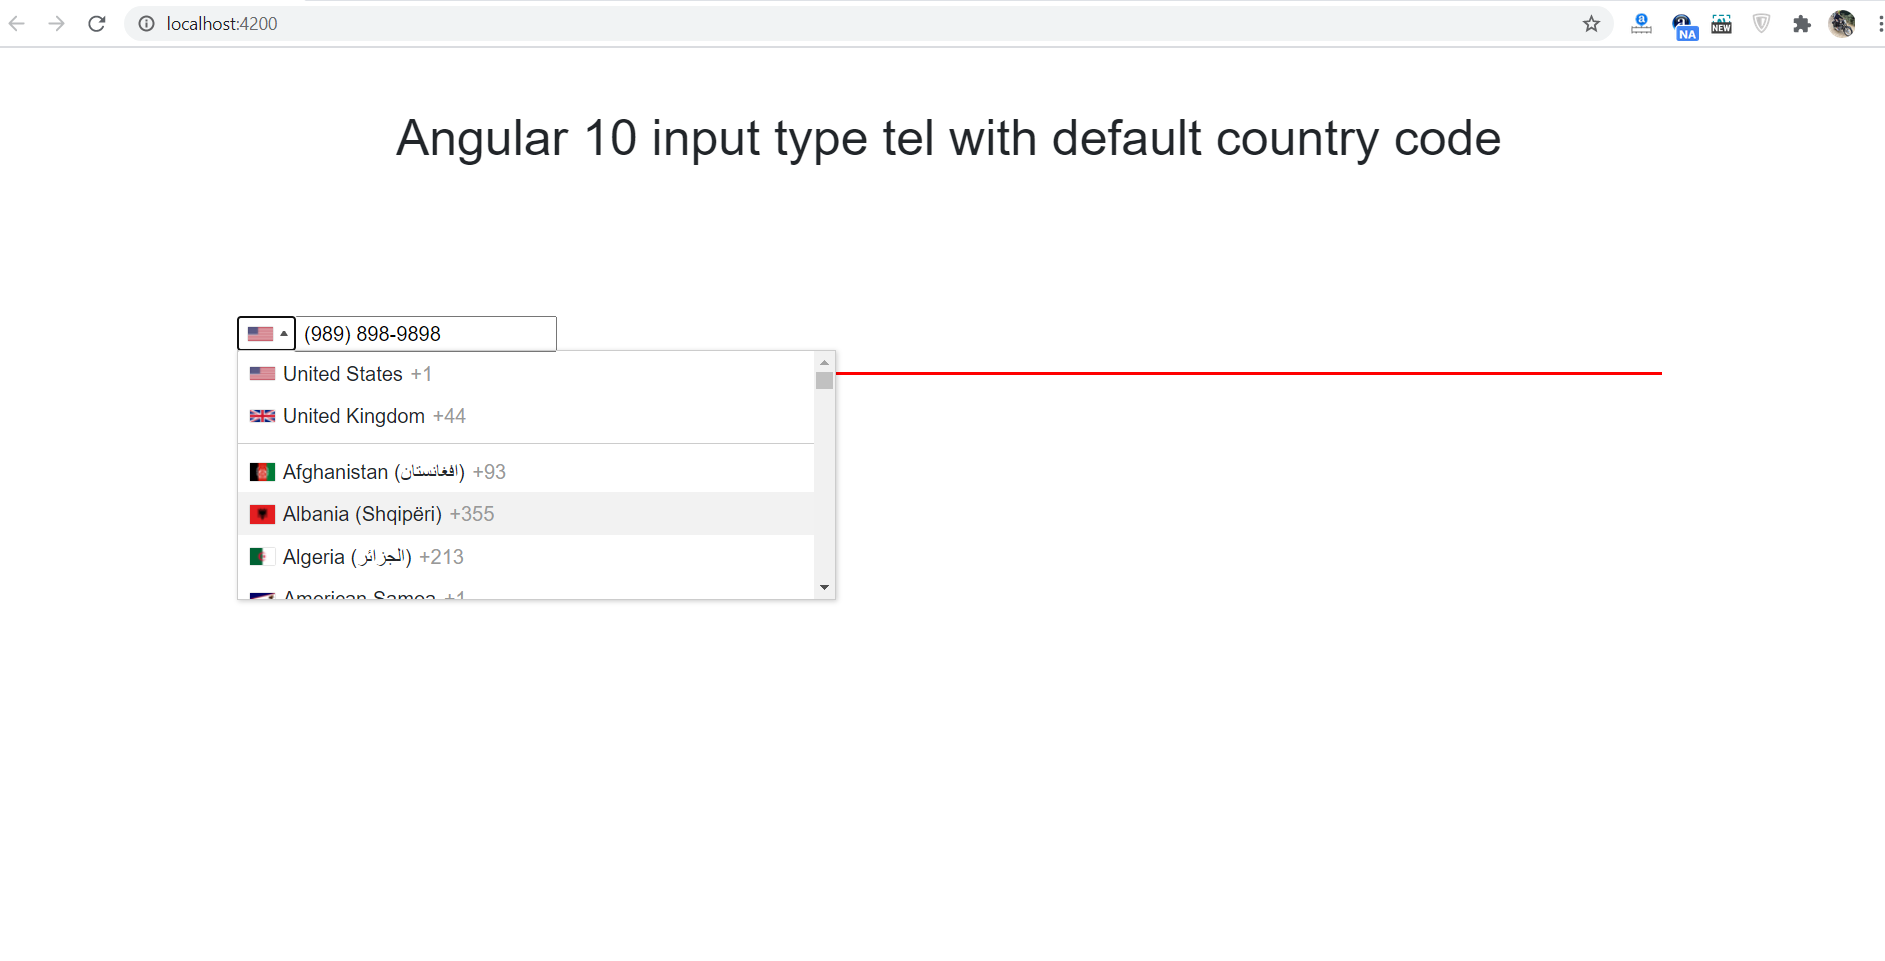 Angular 10 input type tel with default country code